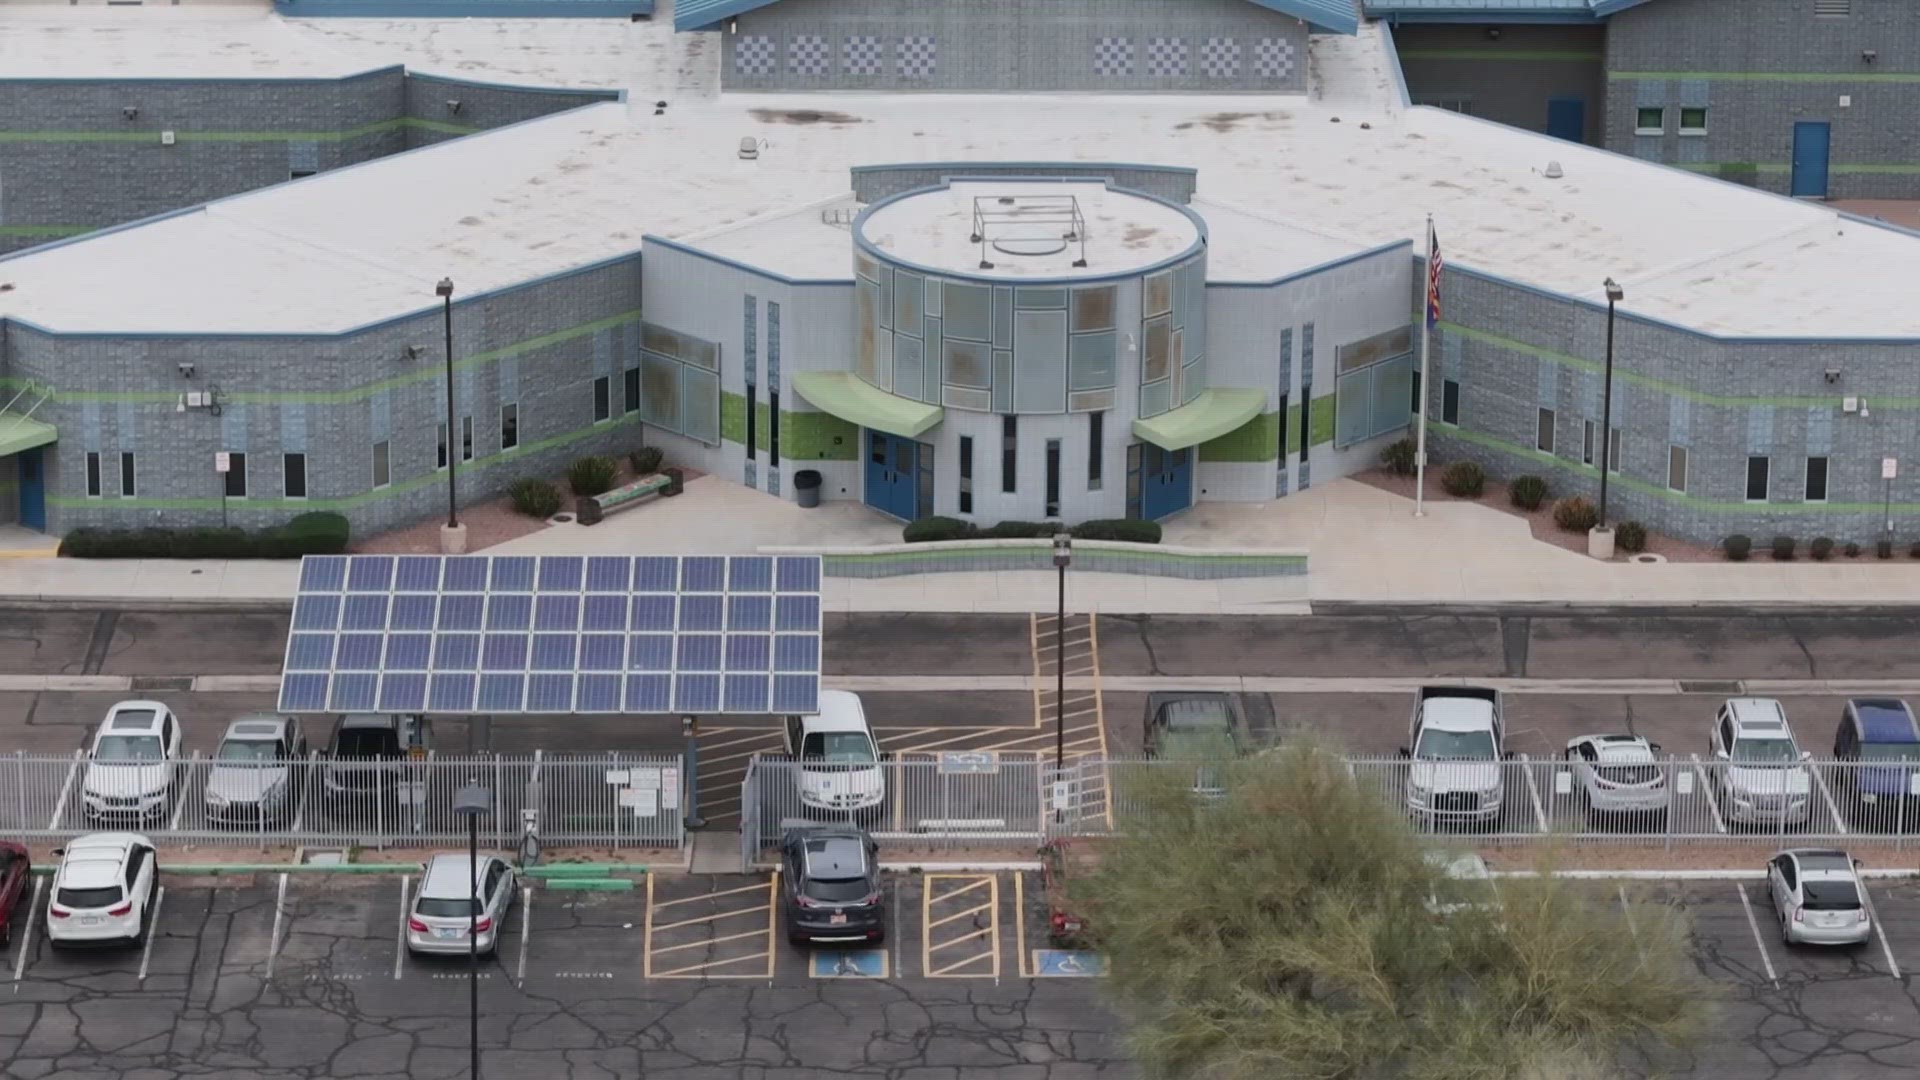 TUHSD said the Tempe Innovation Center will close after only a year in operation and three months after a ribbon cutting for its building's renovation.